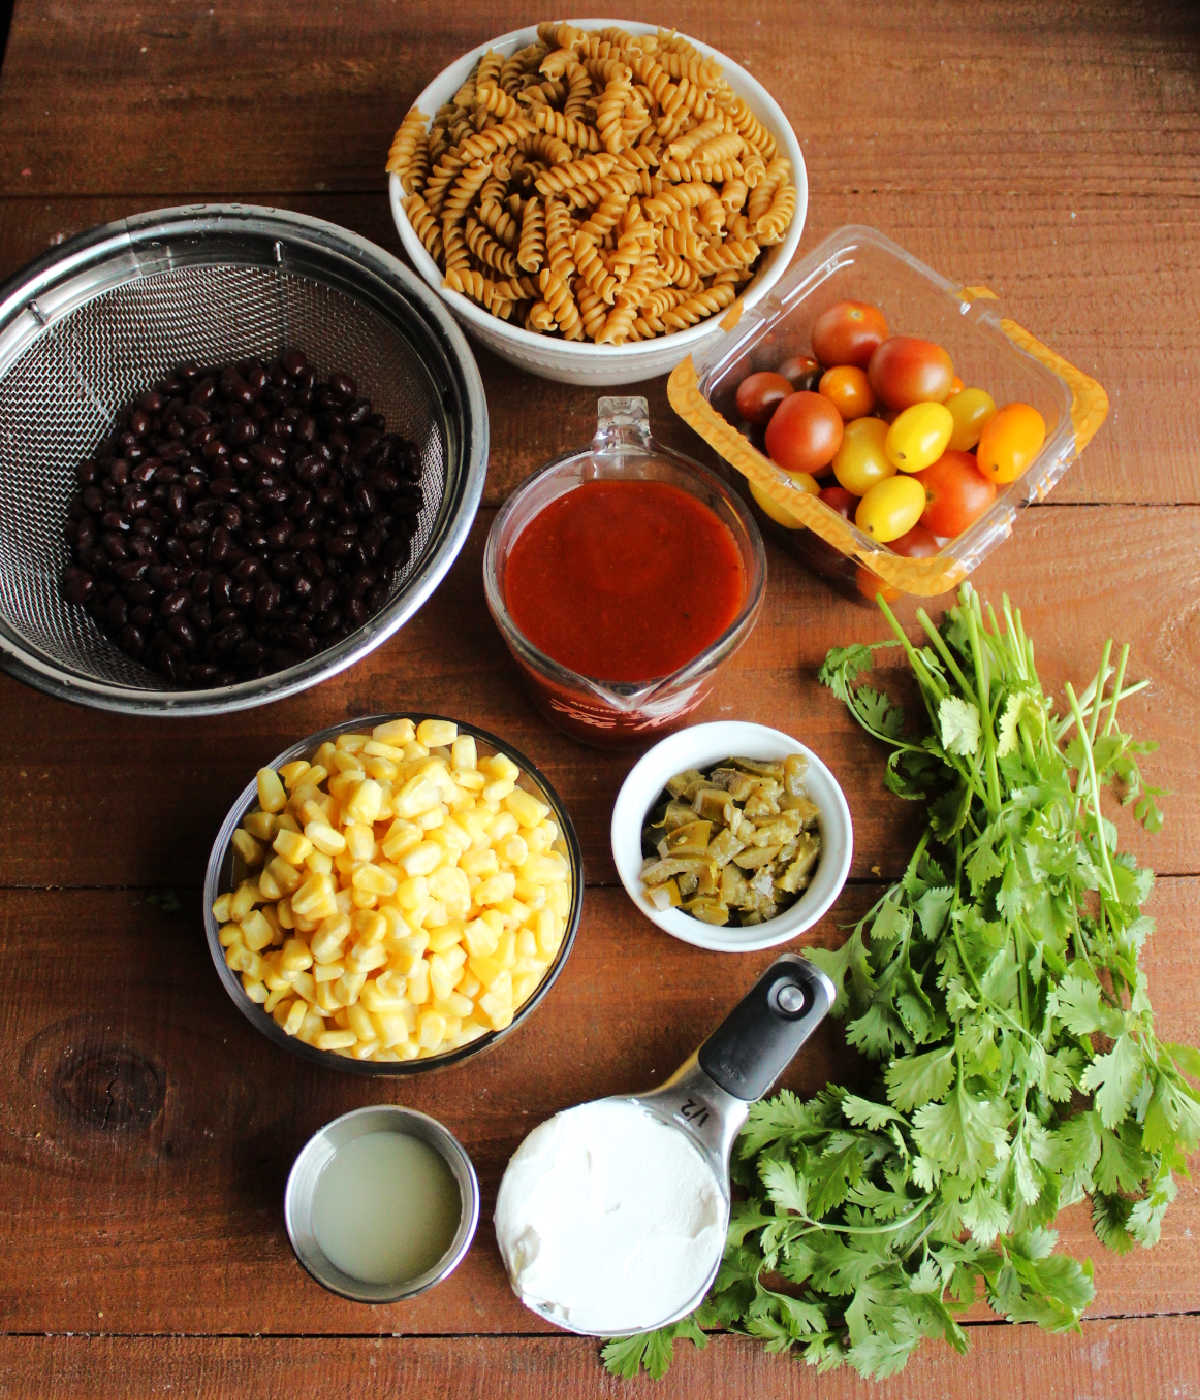 Ingredients including rotini pasta, cherry tomatoes, cilantro. sour cream, lime juice, chopped pickled jalapenos, red enchilada sauce, corn, and black beans ready to be made into pasta salad.